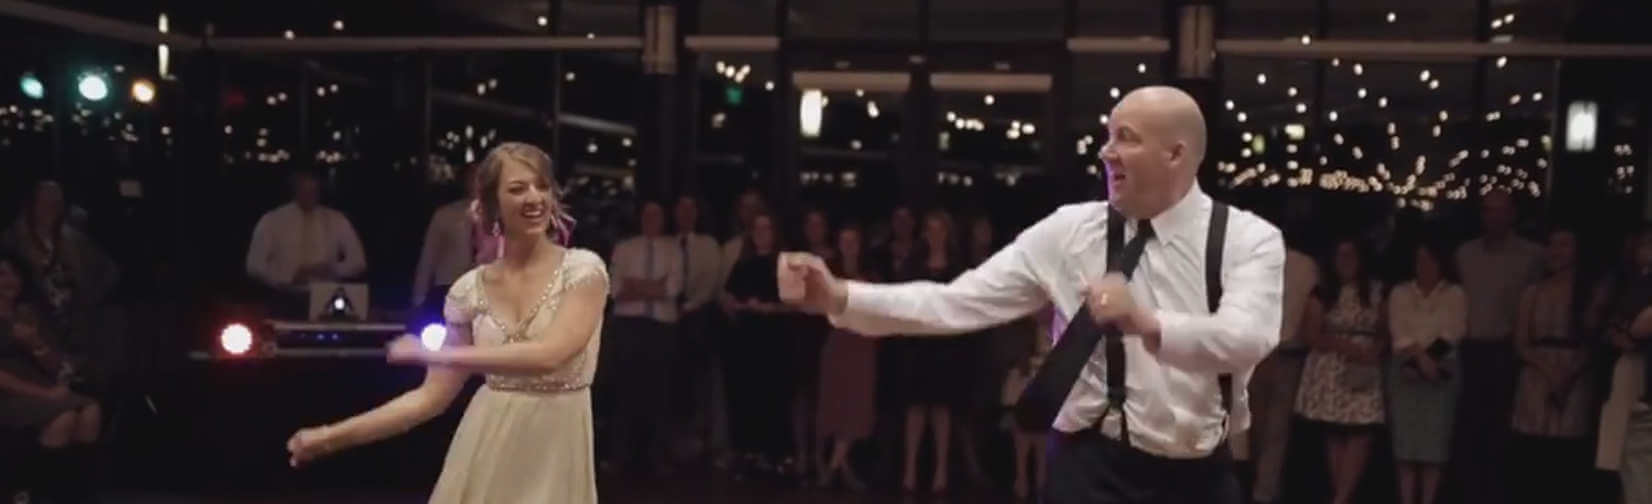 Dad outdances his own daughter at her wedding